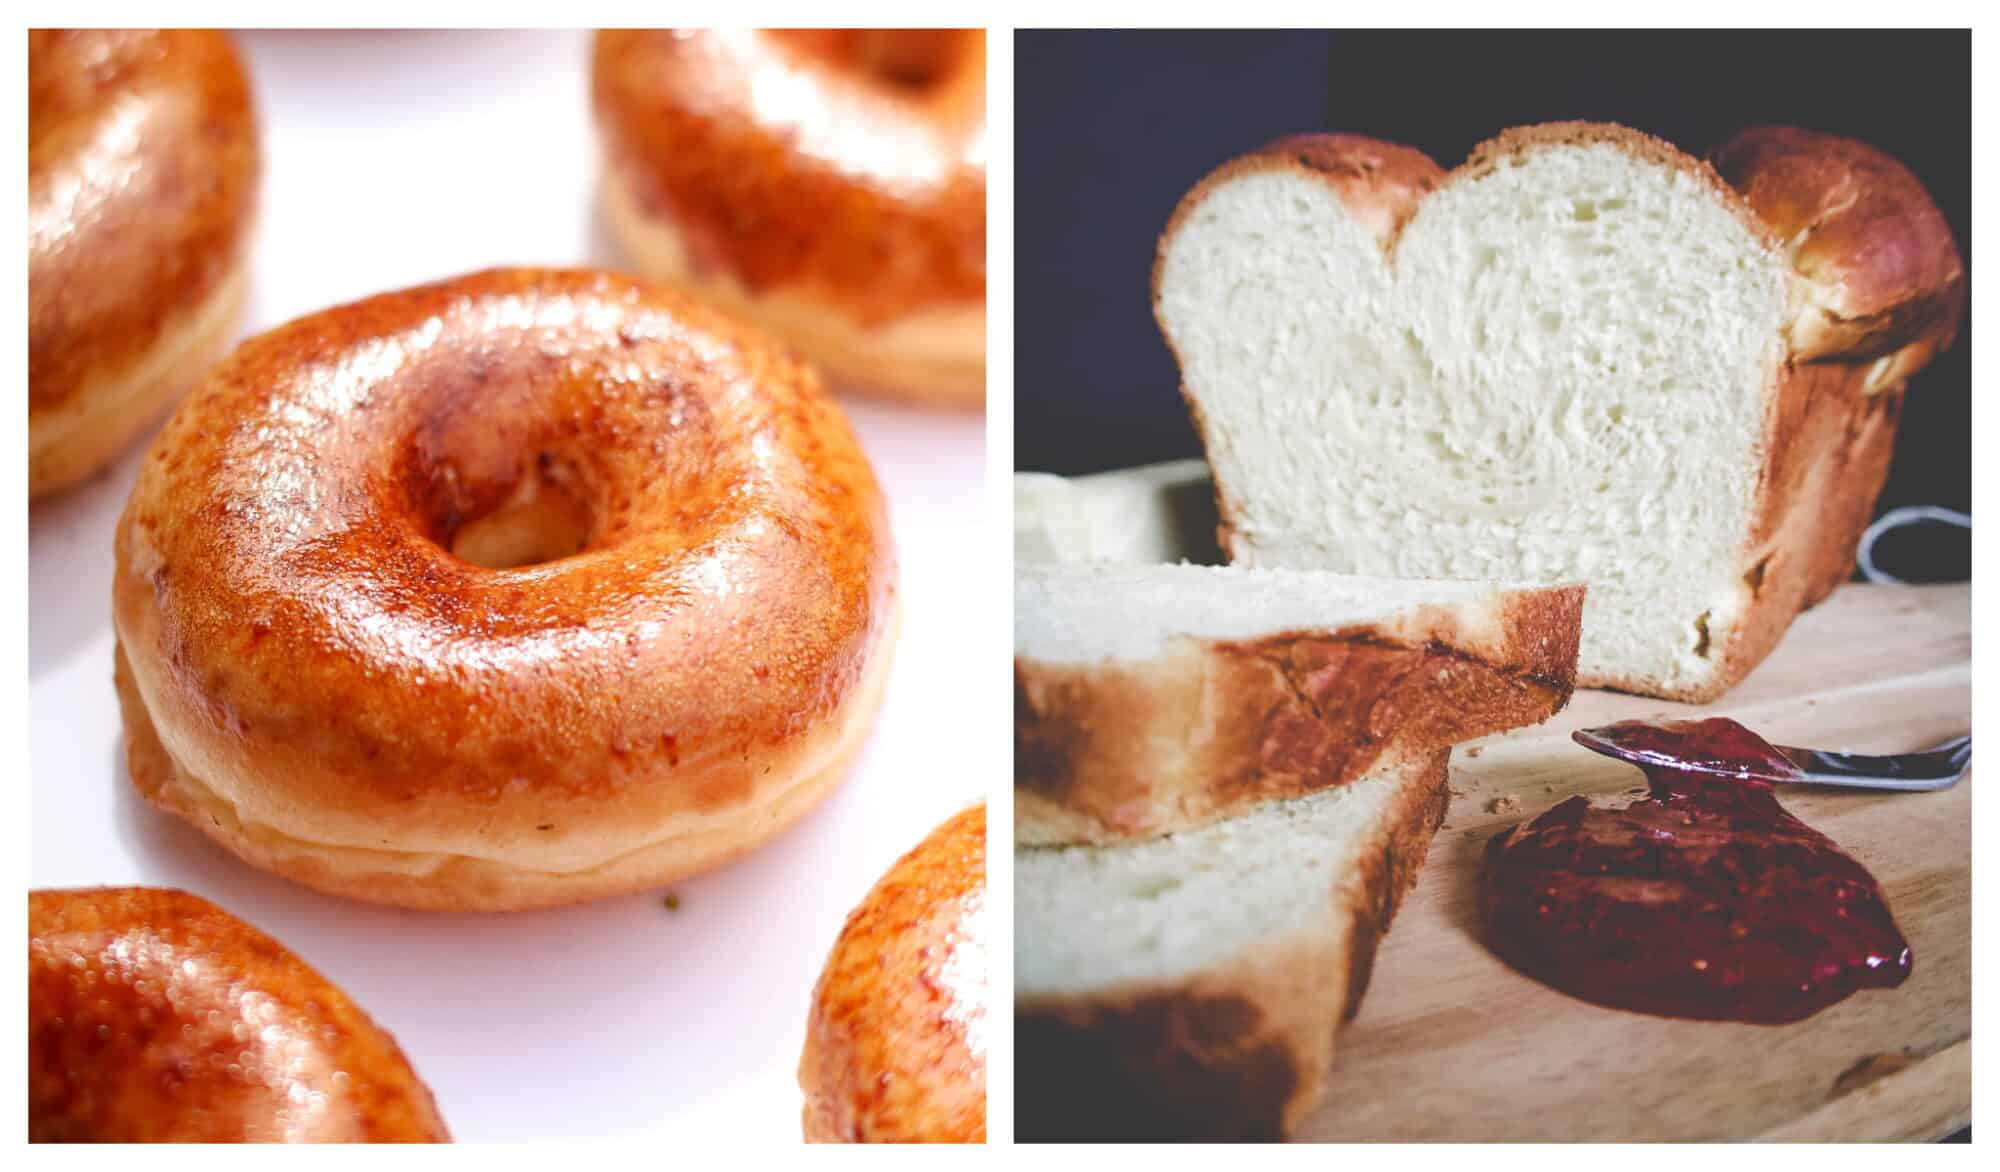 left: several glazed donuts sat on a pink plate; right: a brioche cut open on a wooden cutting board